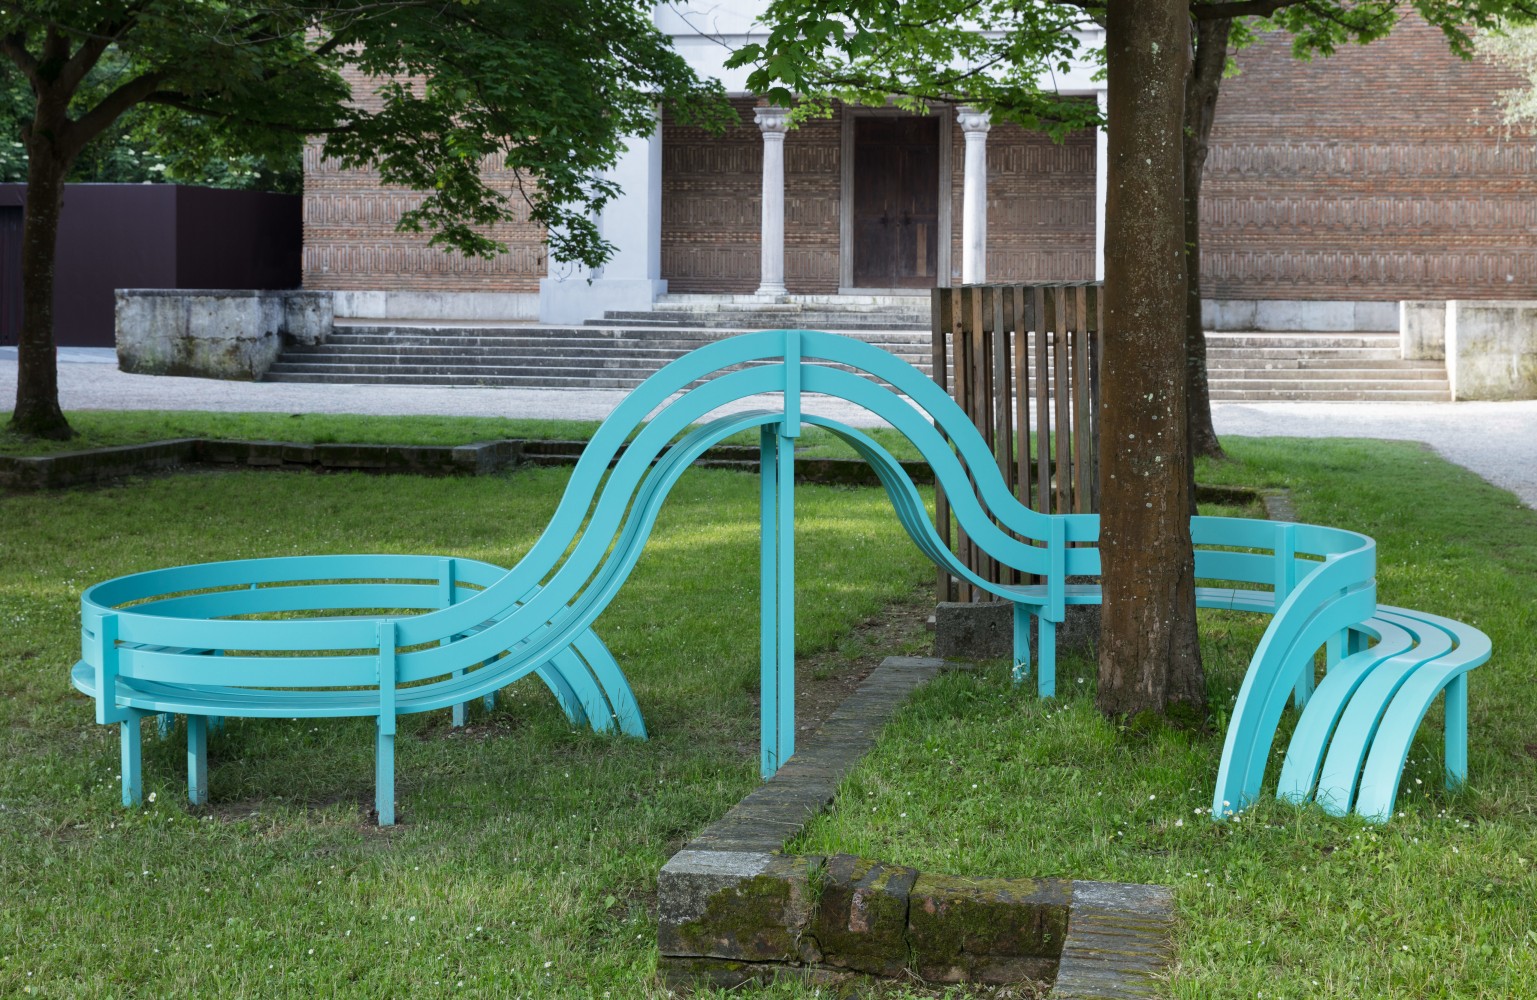 Jeppe Hein

Modified Social Bench for Venice #03

2019

Powder coated aluminum

68 7/8 x 209 1/2 x 94 1/2 inches (175 x 532 x 240 cm)

Edition&amp;nbsp;of 3, with 2 AP

JH 519